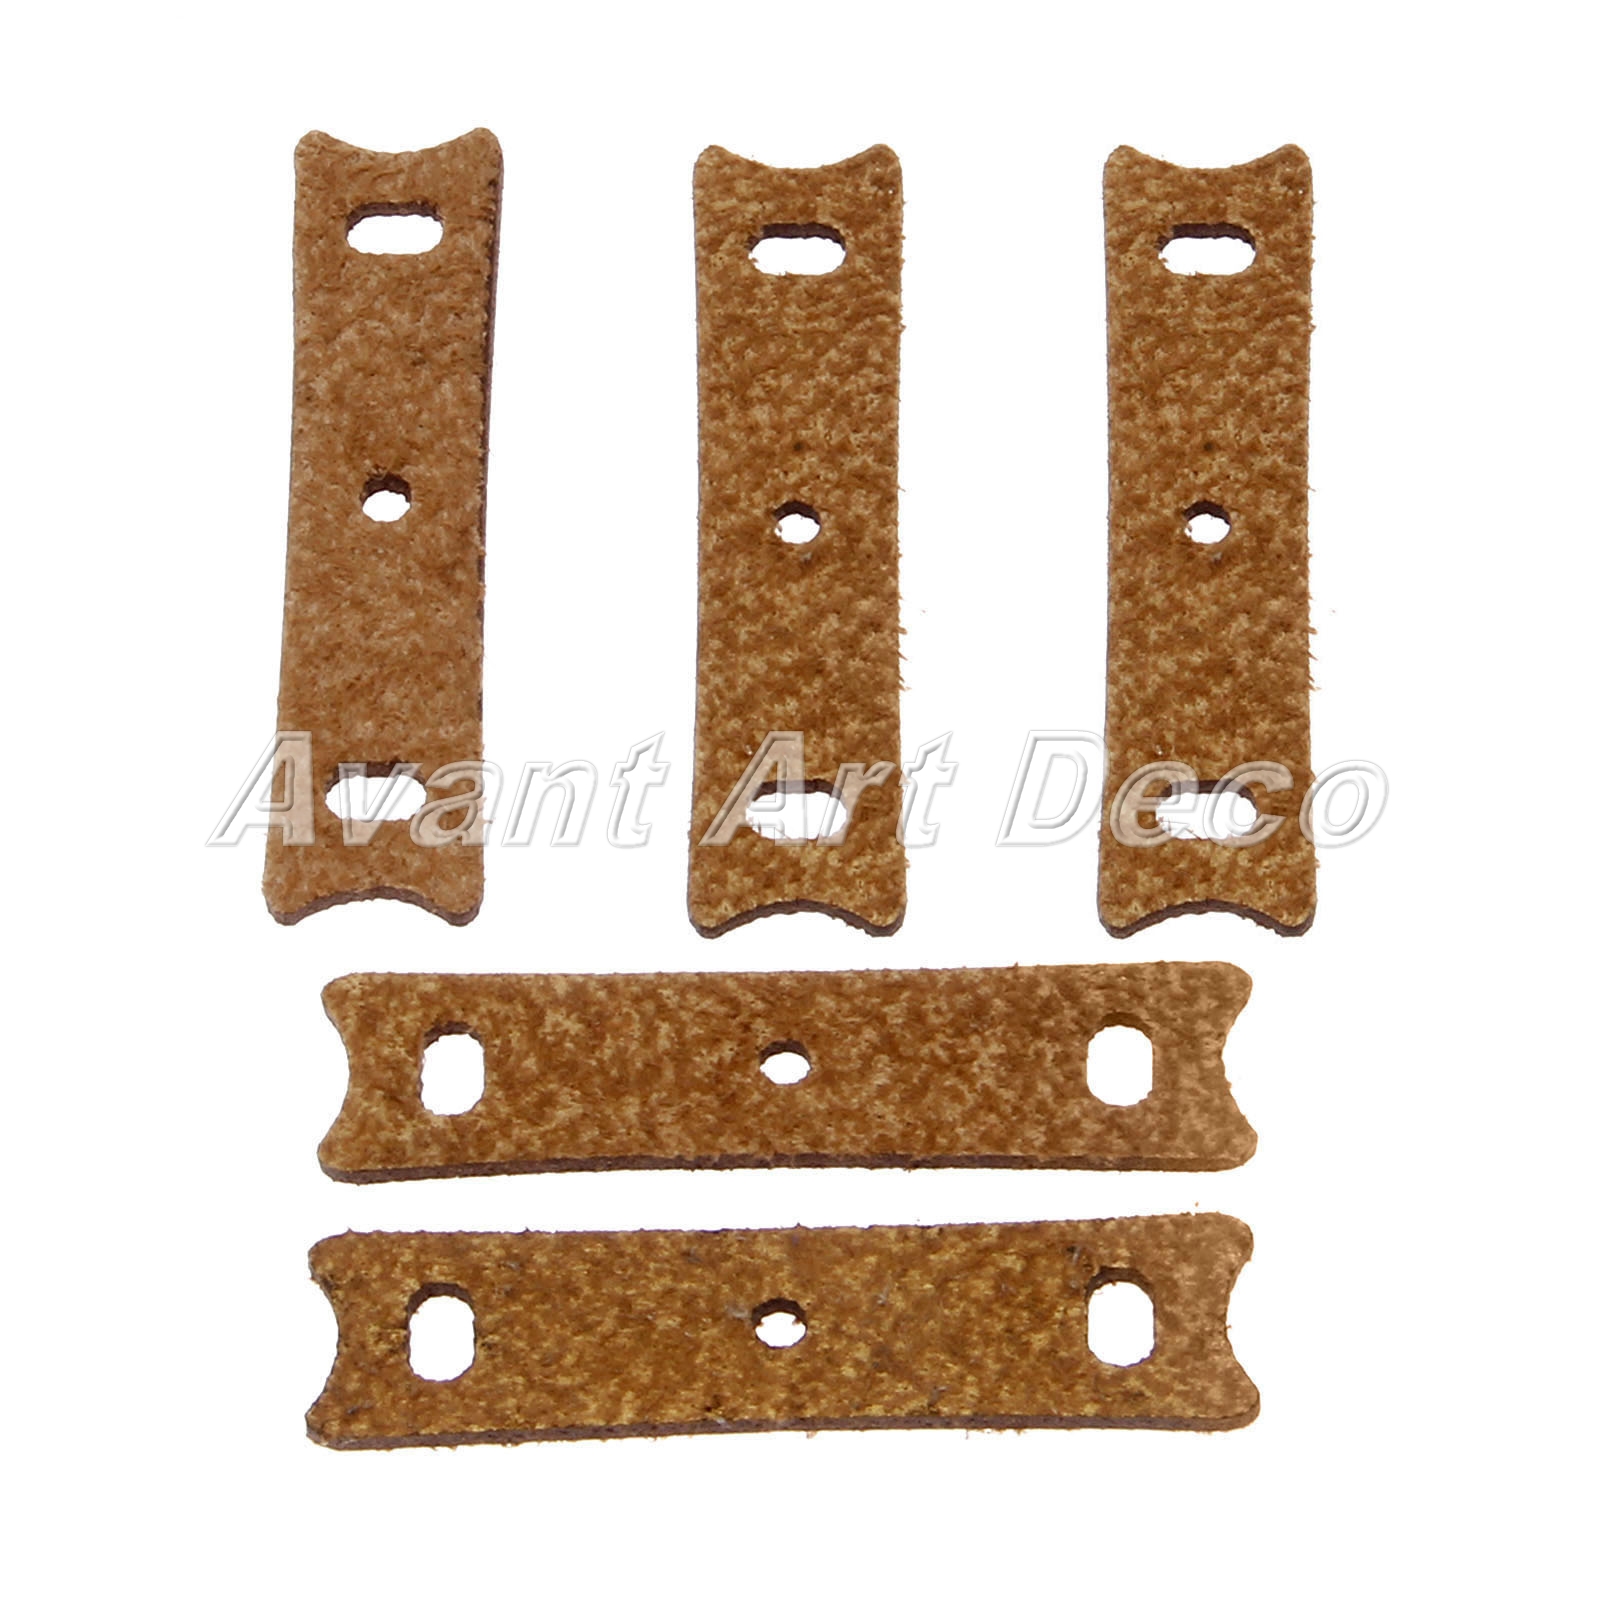 Details about   Professional Slingshot Pouches Catapult Band Aid Swing Target Equipment Pocket 